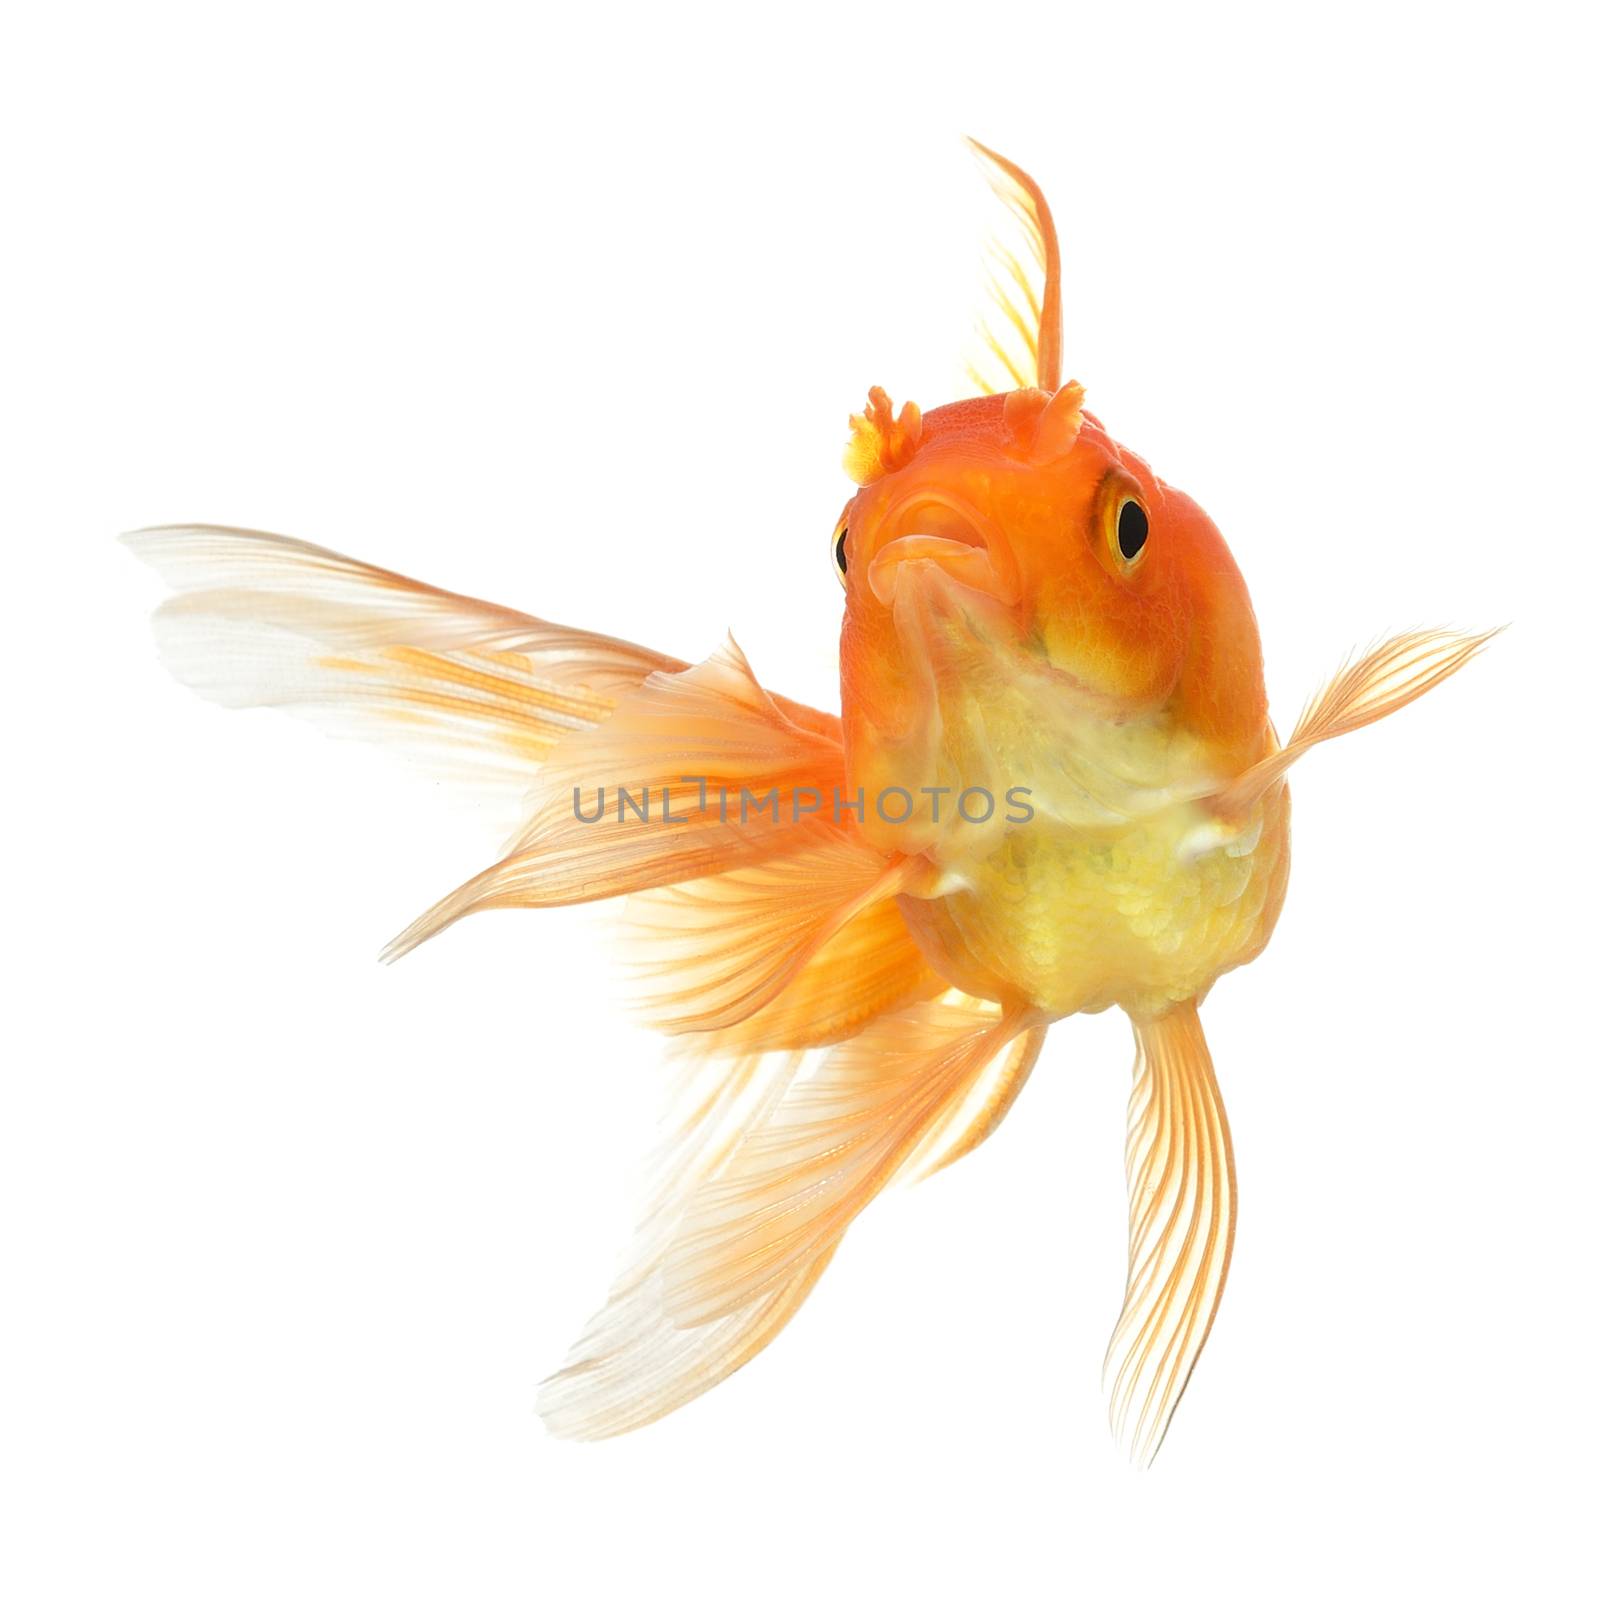 gold fish isolated on white background by sommai